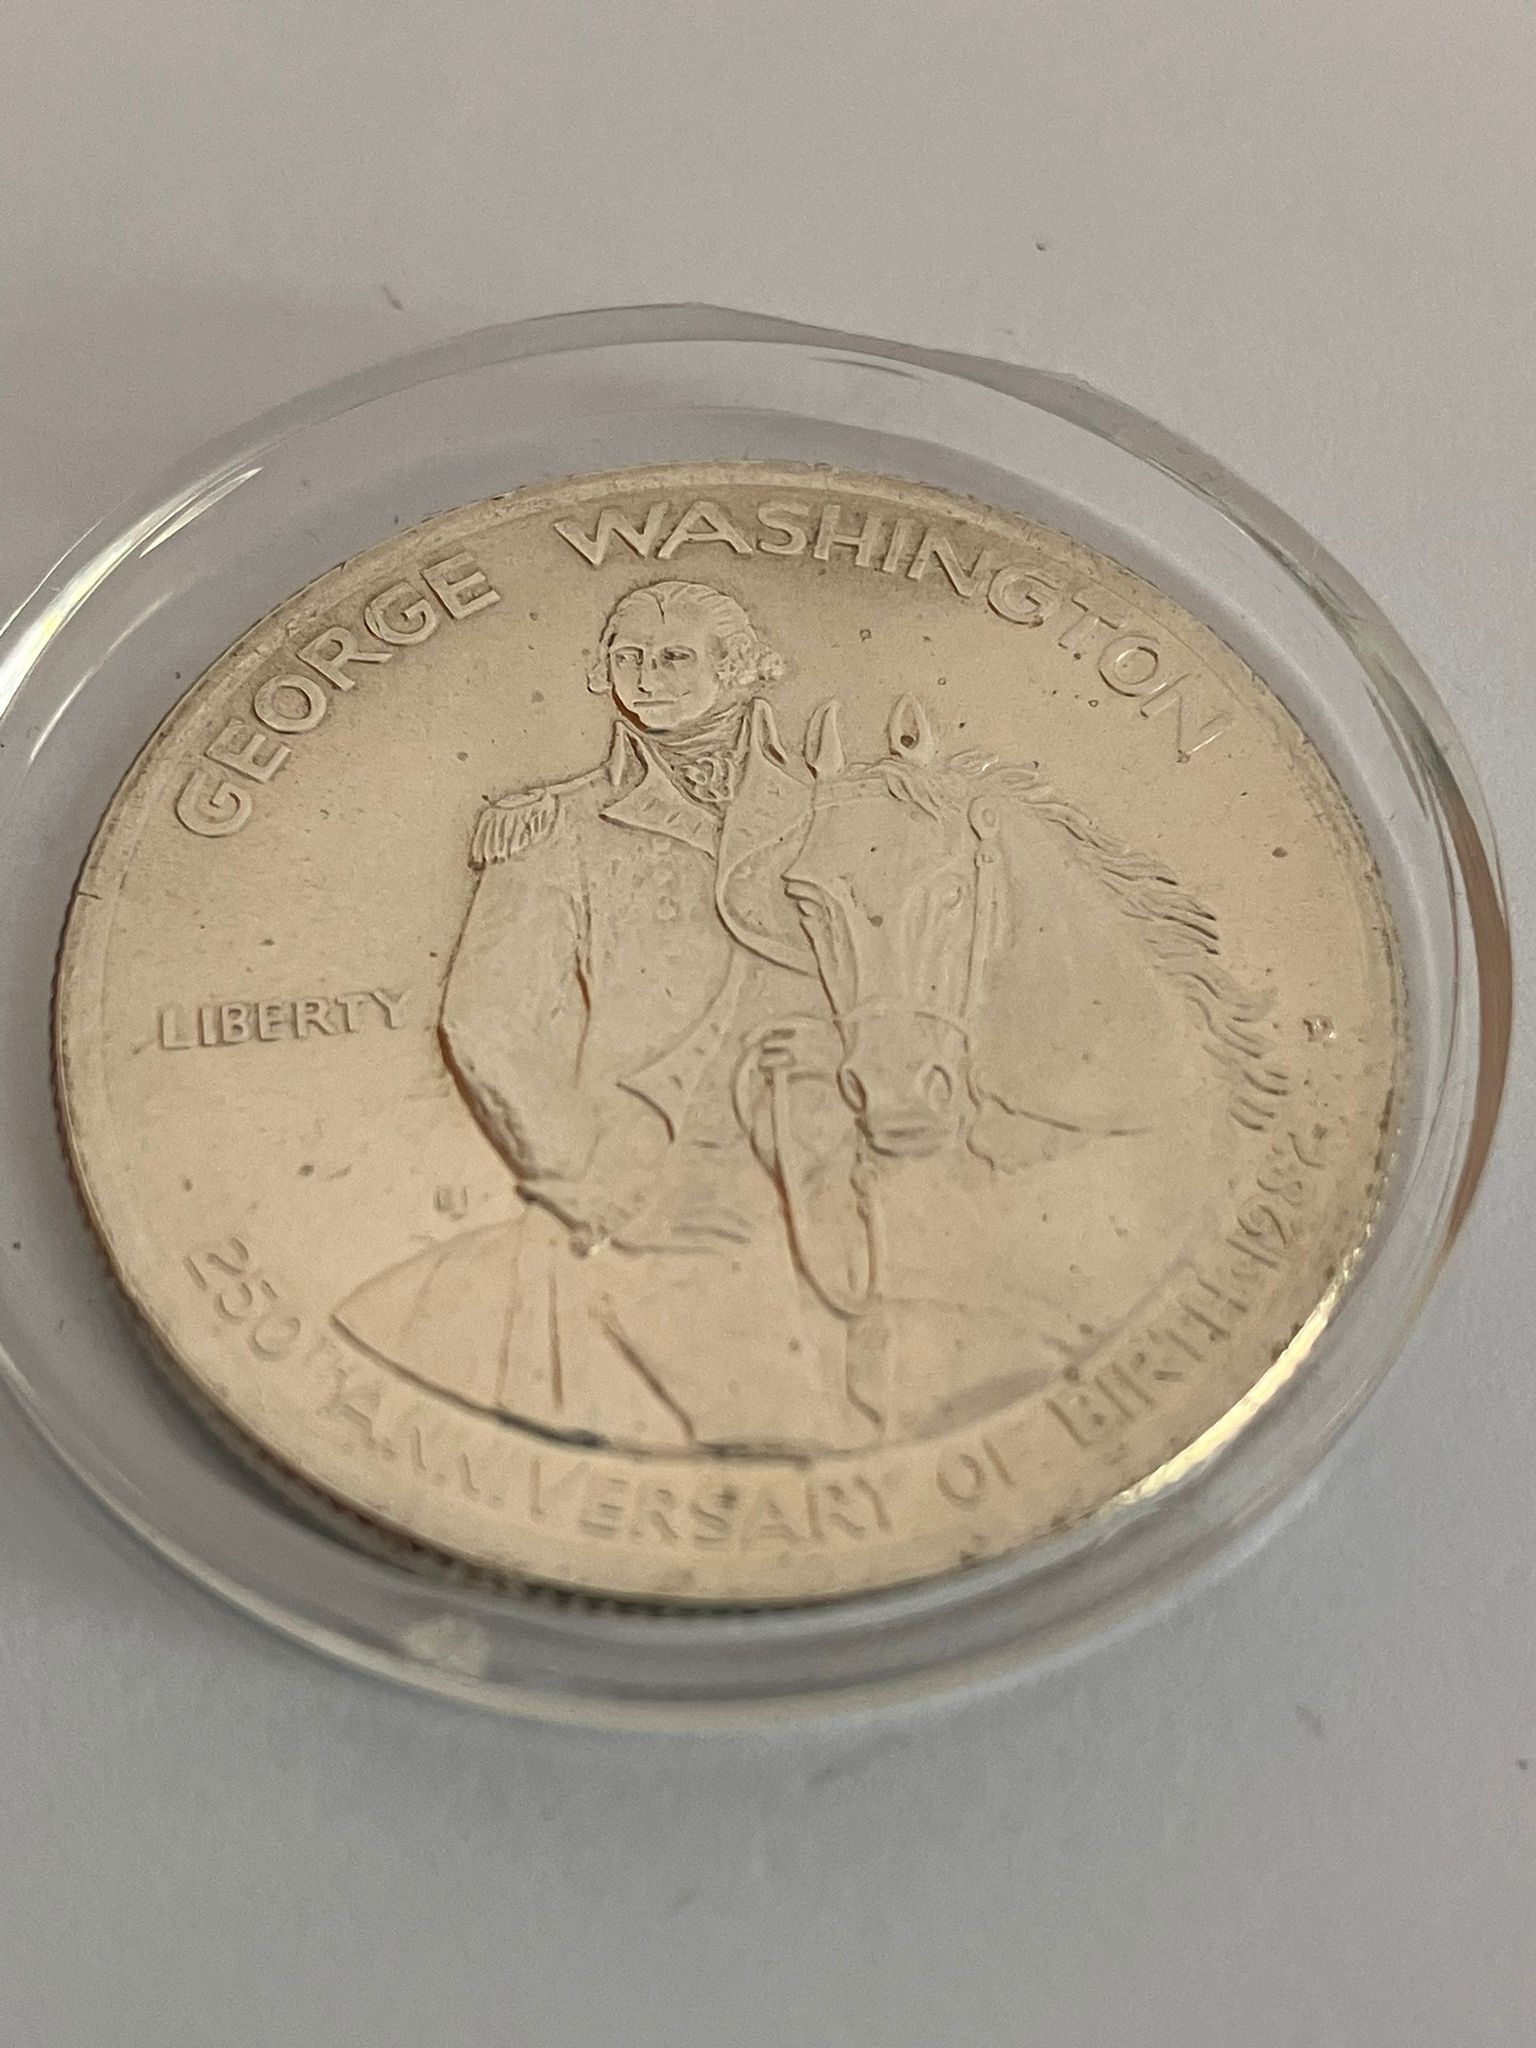 SILVER GEORGE WASHINGTON HALF DOLLAR 1982 .Minted in 1982 to commemorate 250 years since the birth